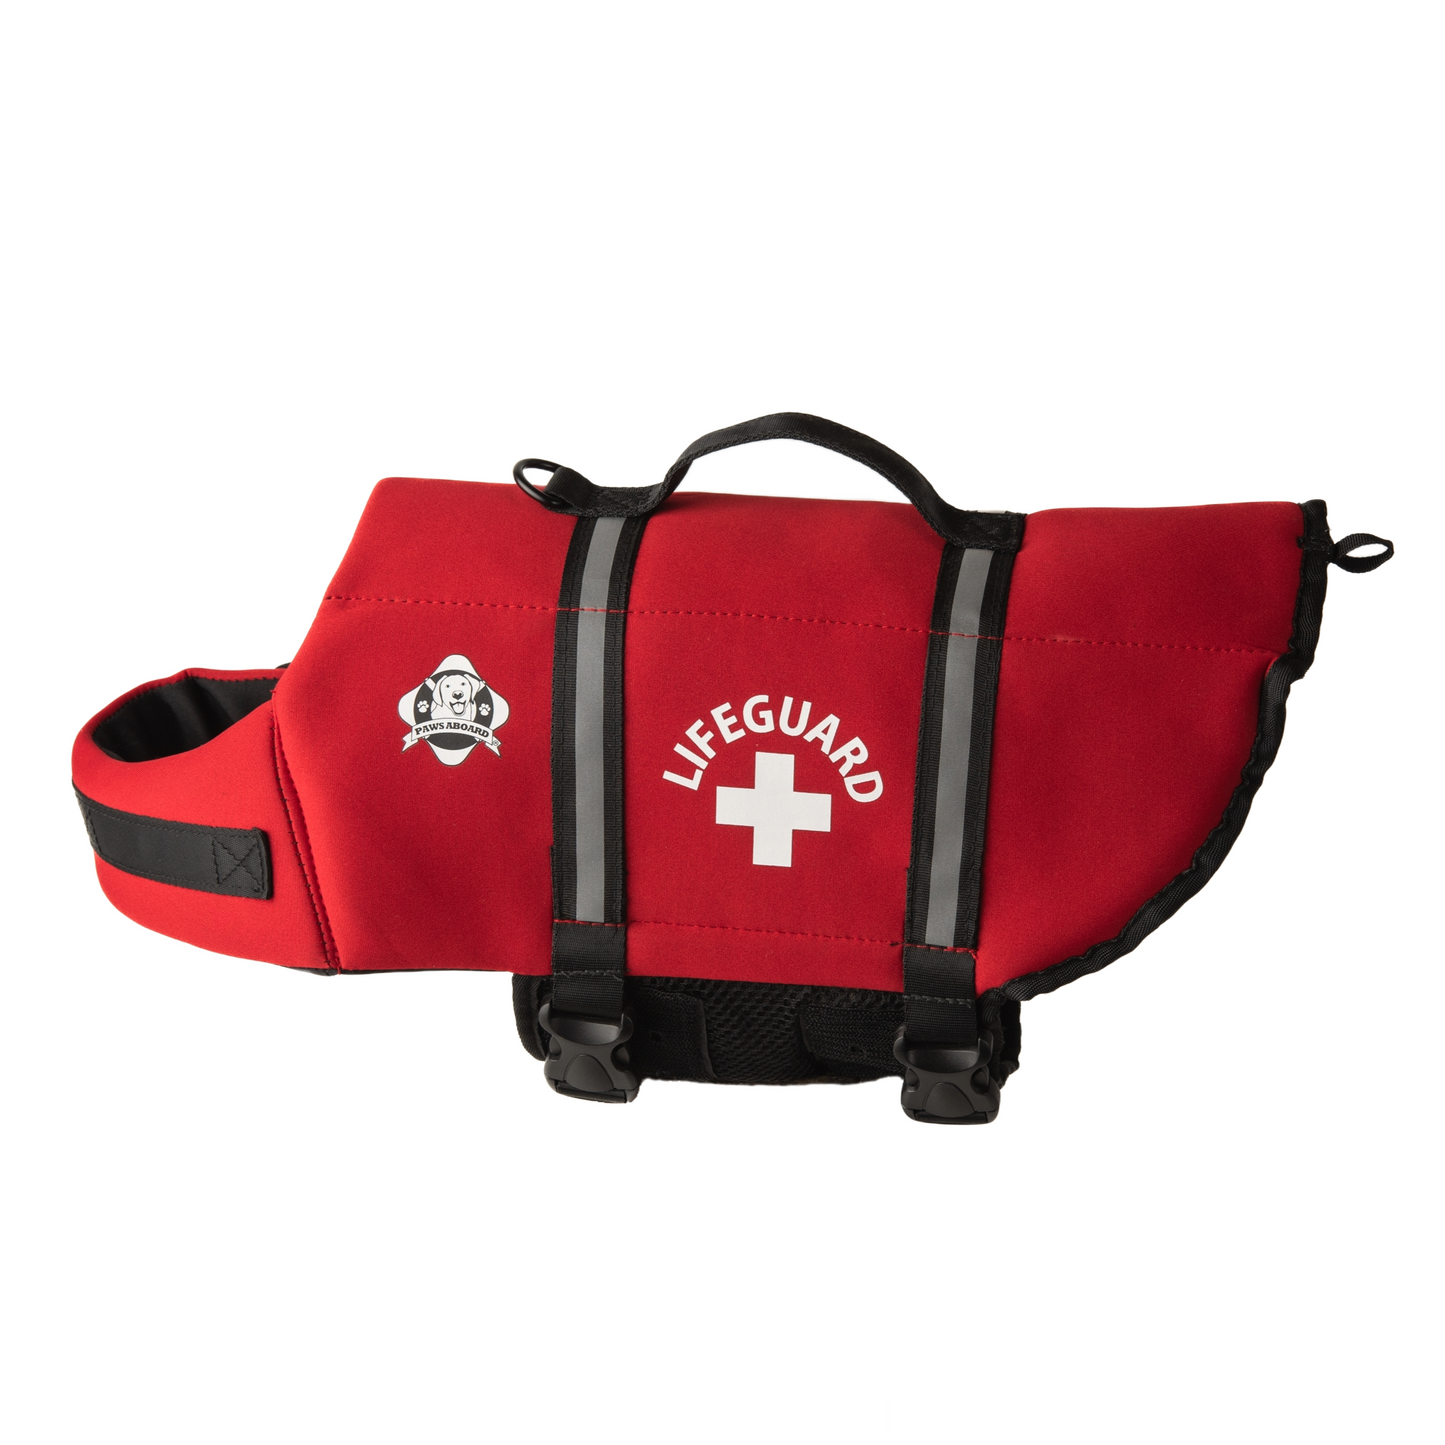 Bright red dog life jacket with Life Guard in print with life guard cross centered between reflective straps, top rescue handle. Paws Aboard logo is also on side of neoprene jacket.